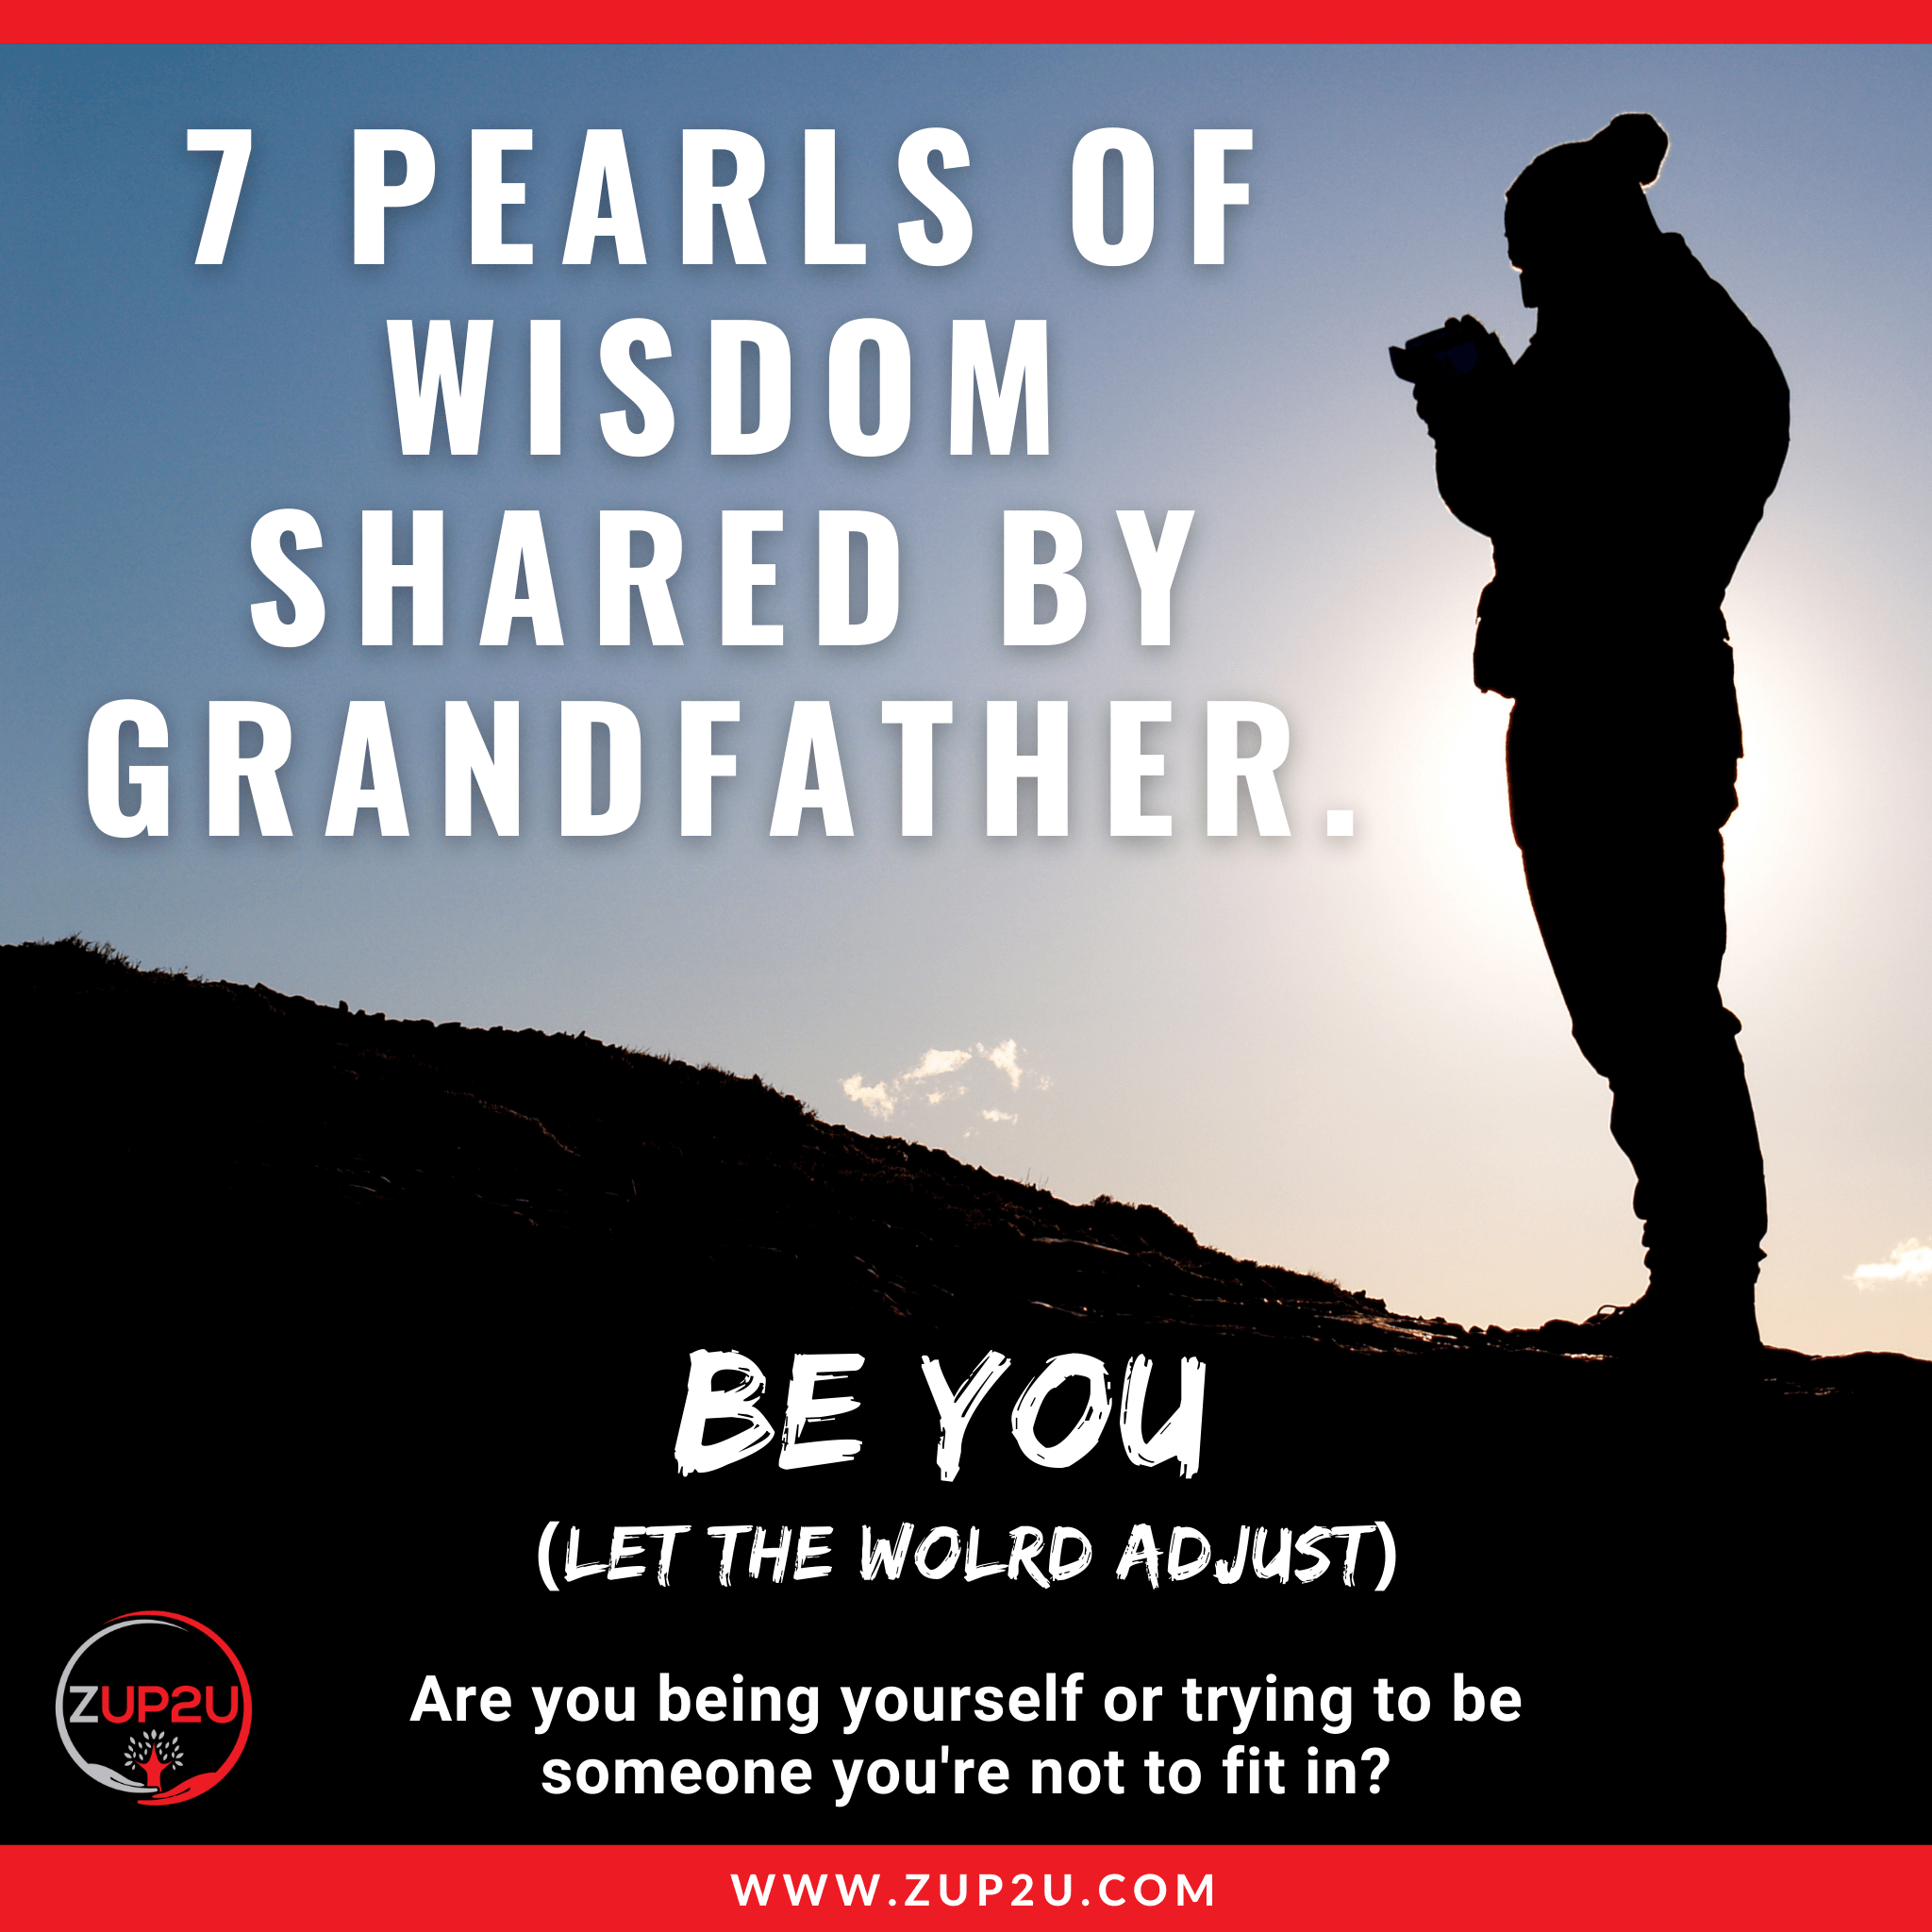 Seven pearls of wisdom shared by grandfather!